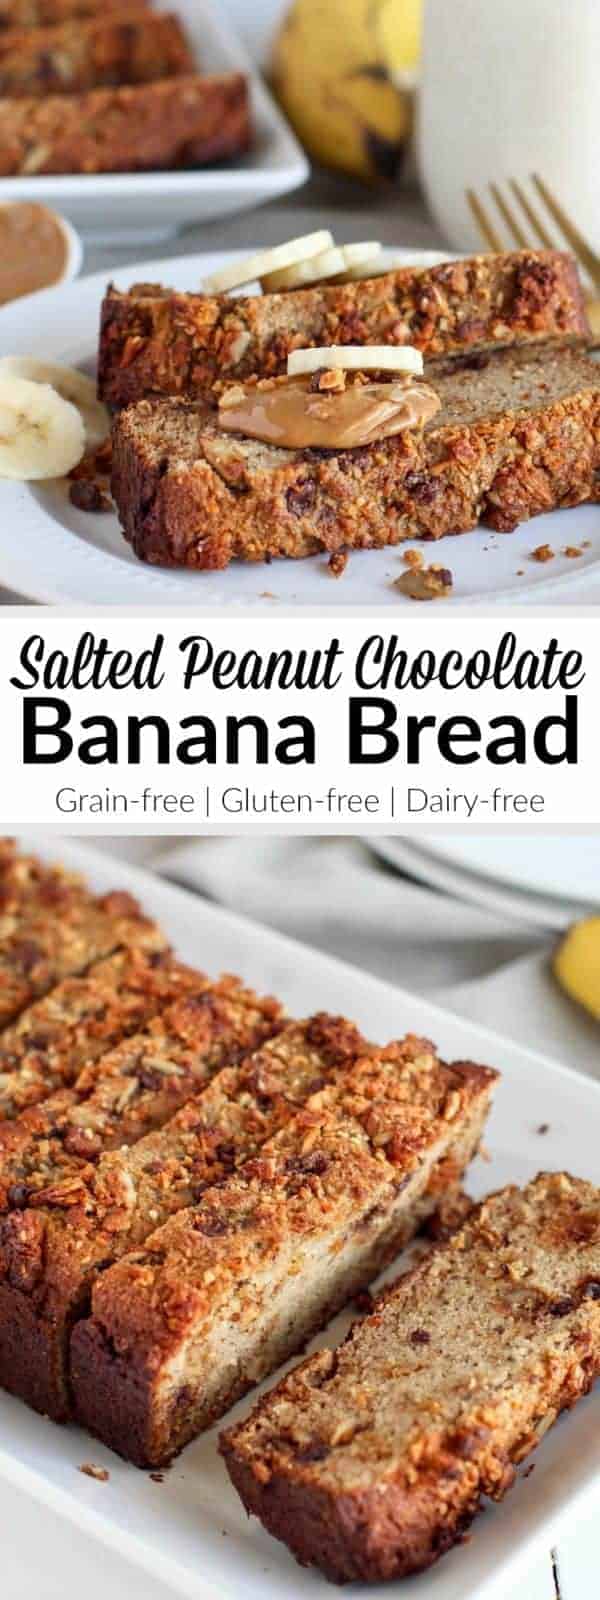 Grain-free Salted Peanut Chocolate Banana Bread: One simple addition turns a classic banana bread into something even more delicious! With only 7 grams of sugar per serving it's healthy enough to enjoy as part of your breakfast yet still decadent enough to serve at a special gathering with friends and/or family. | Grain-free | Gluten-free | Dairy-free | therealfoodrds.com